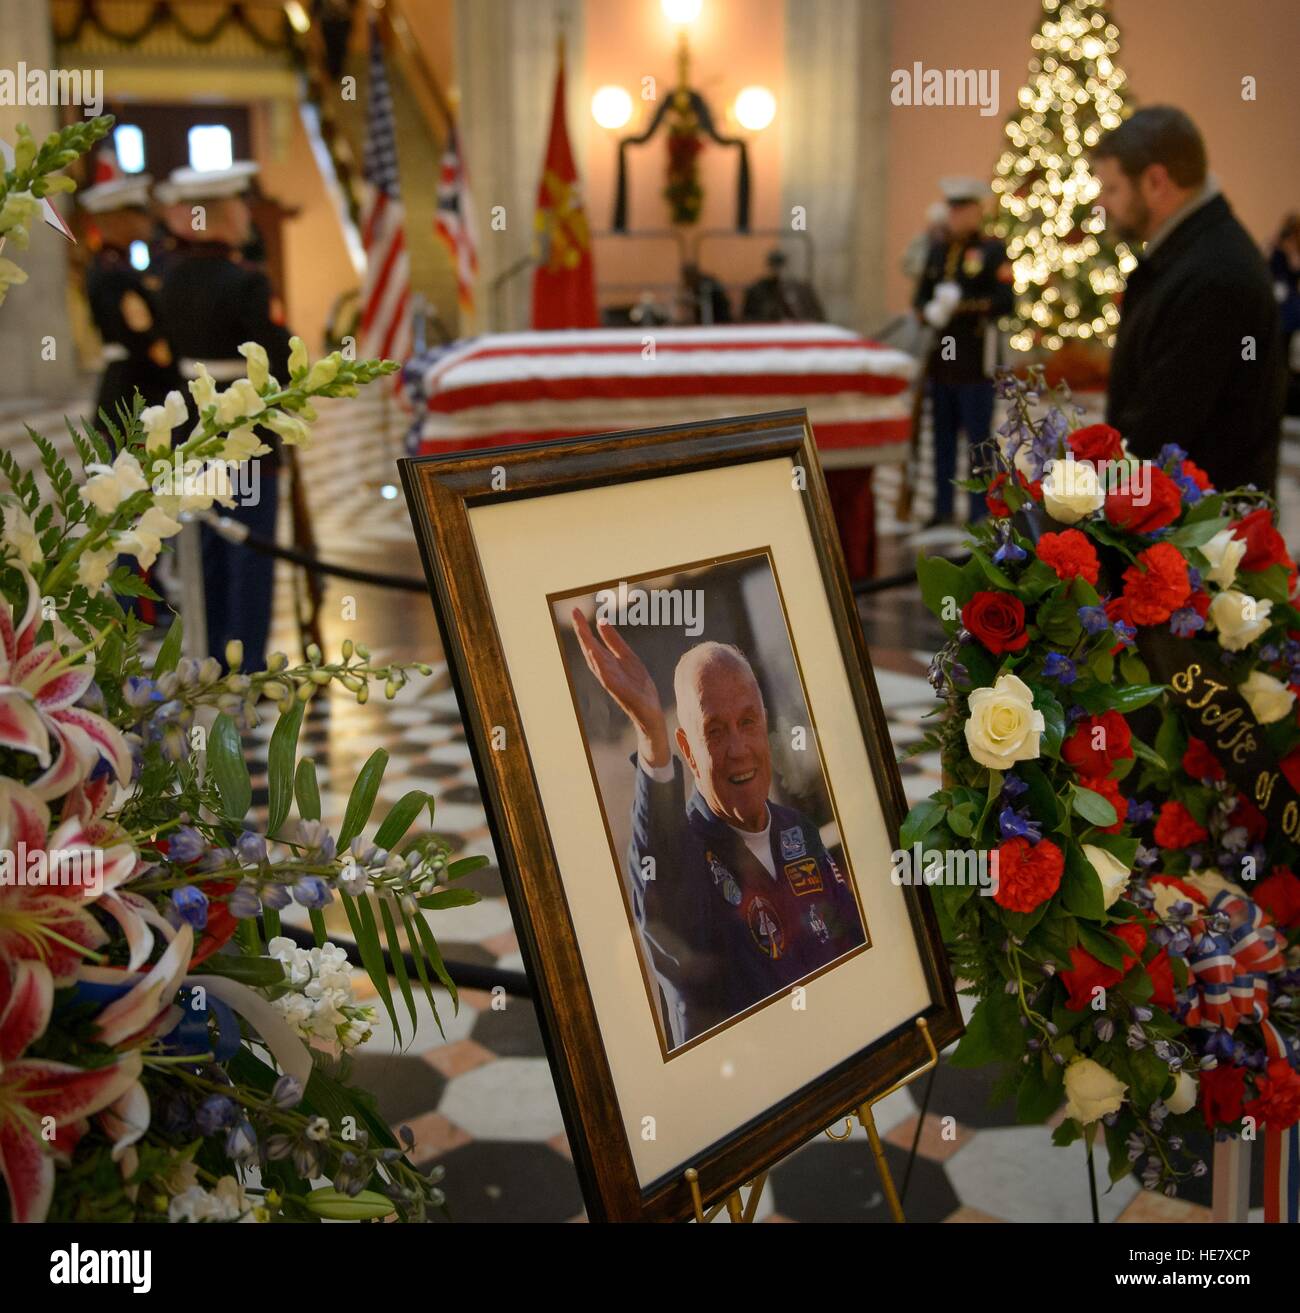 Members of the public pay their respects to astronaut and former Senator John Glenn in repose at the Ohio Statehouse December 16, 2016 in Columbus, Ohio. The former Marine pilot, Senator and first man to orbit the earth died last week at the age of 95. Stock Photo